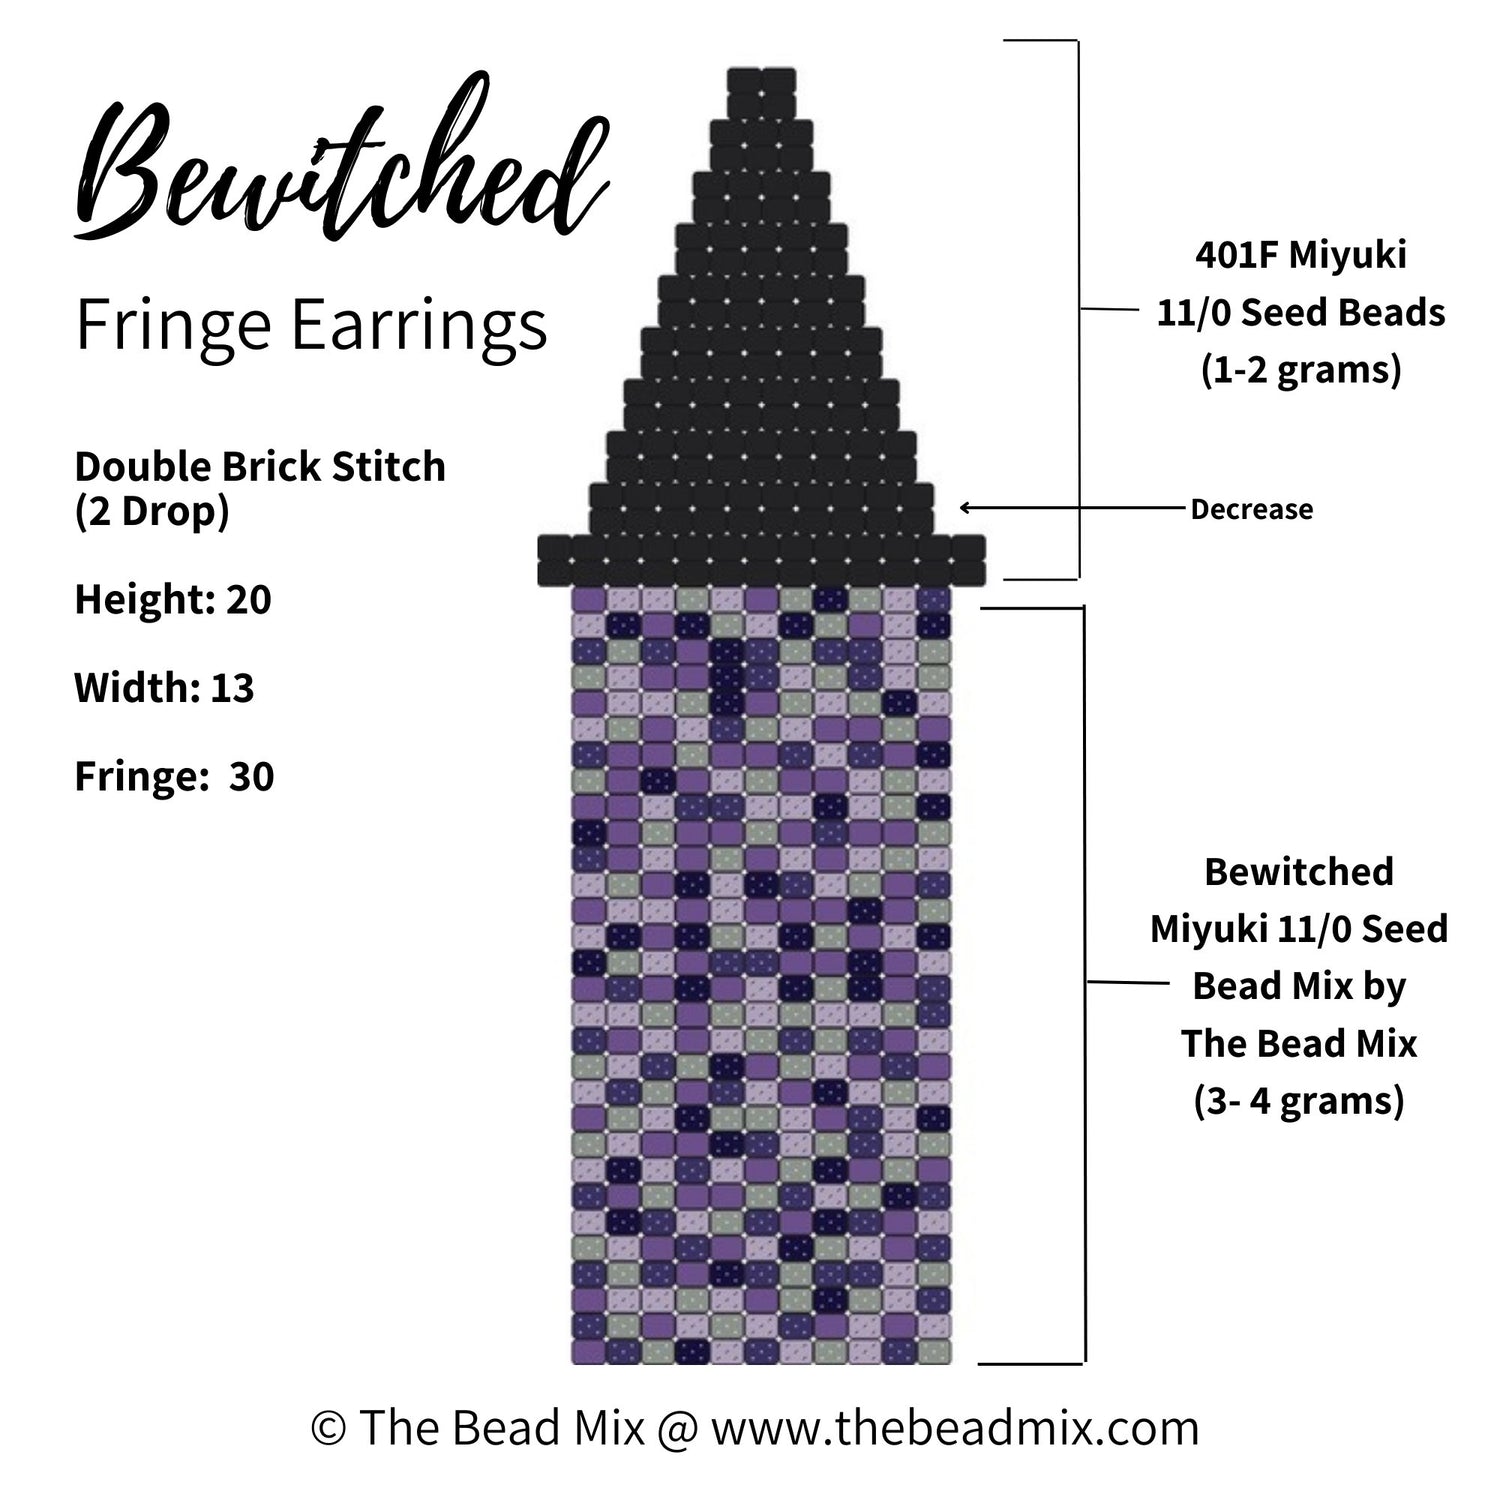 Free beading pattern for witch's hat beaded fringe earrings made with black, purple, and green Miyuki 11/0 seed beads created by The Bead Mix